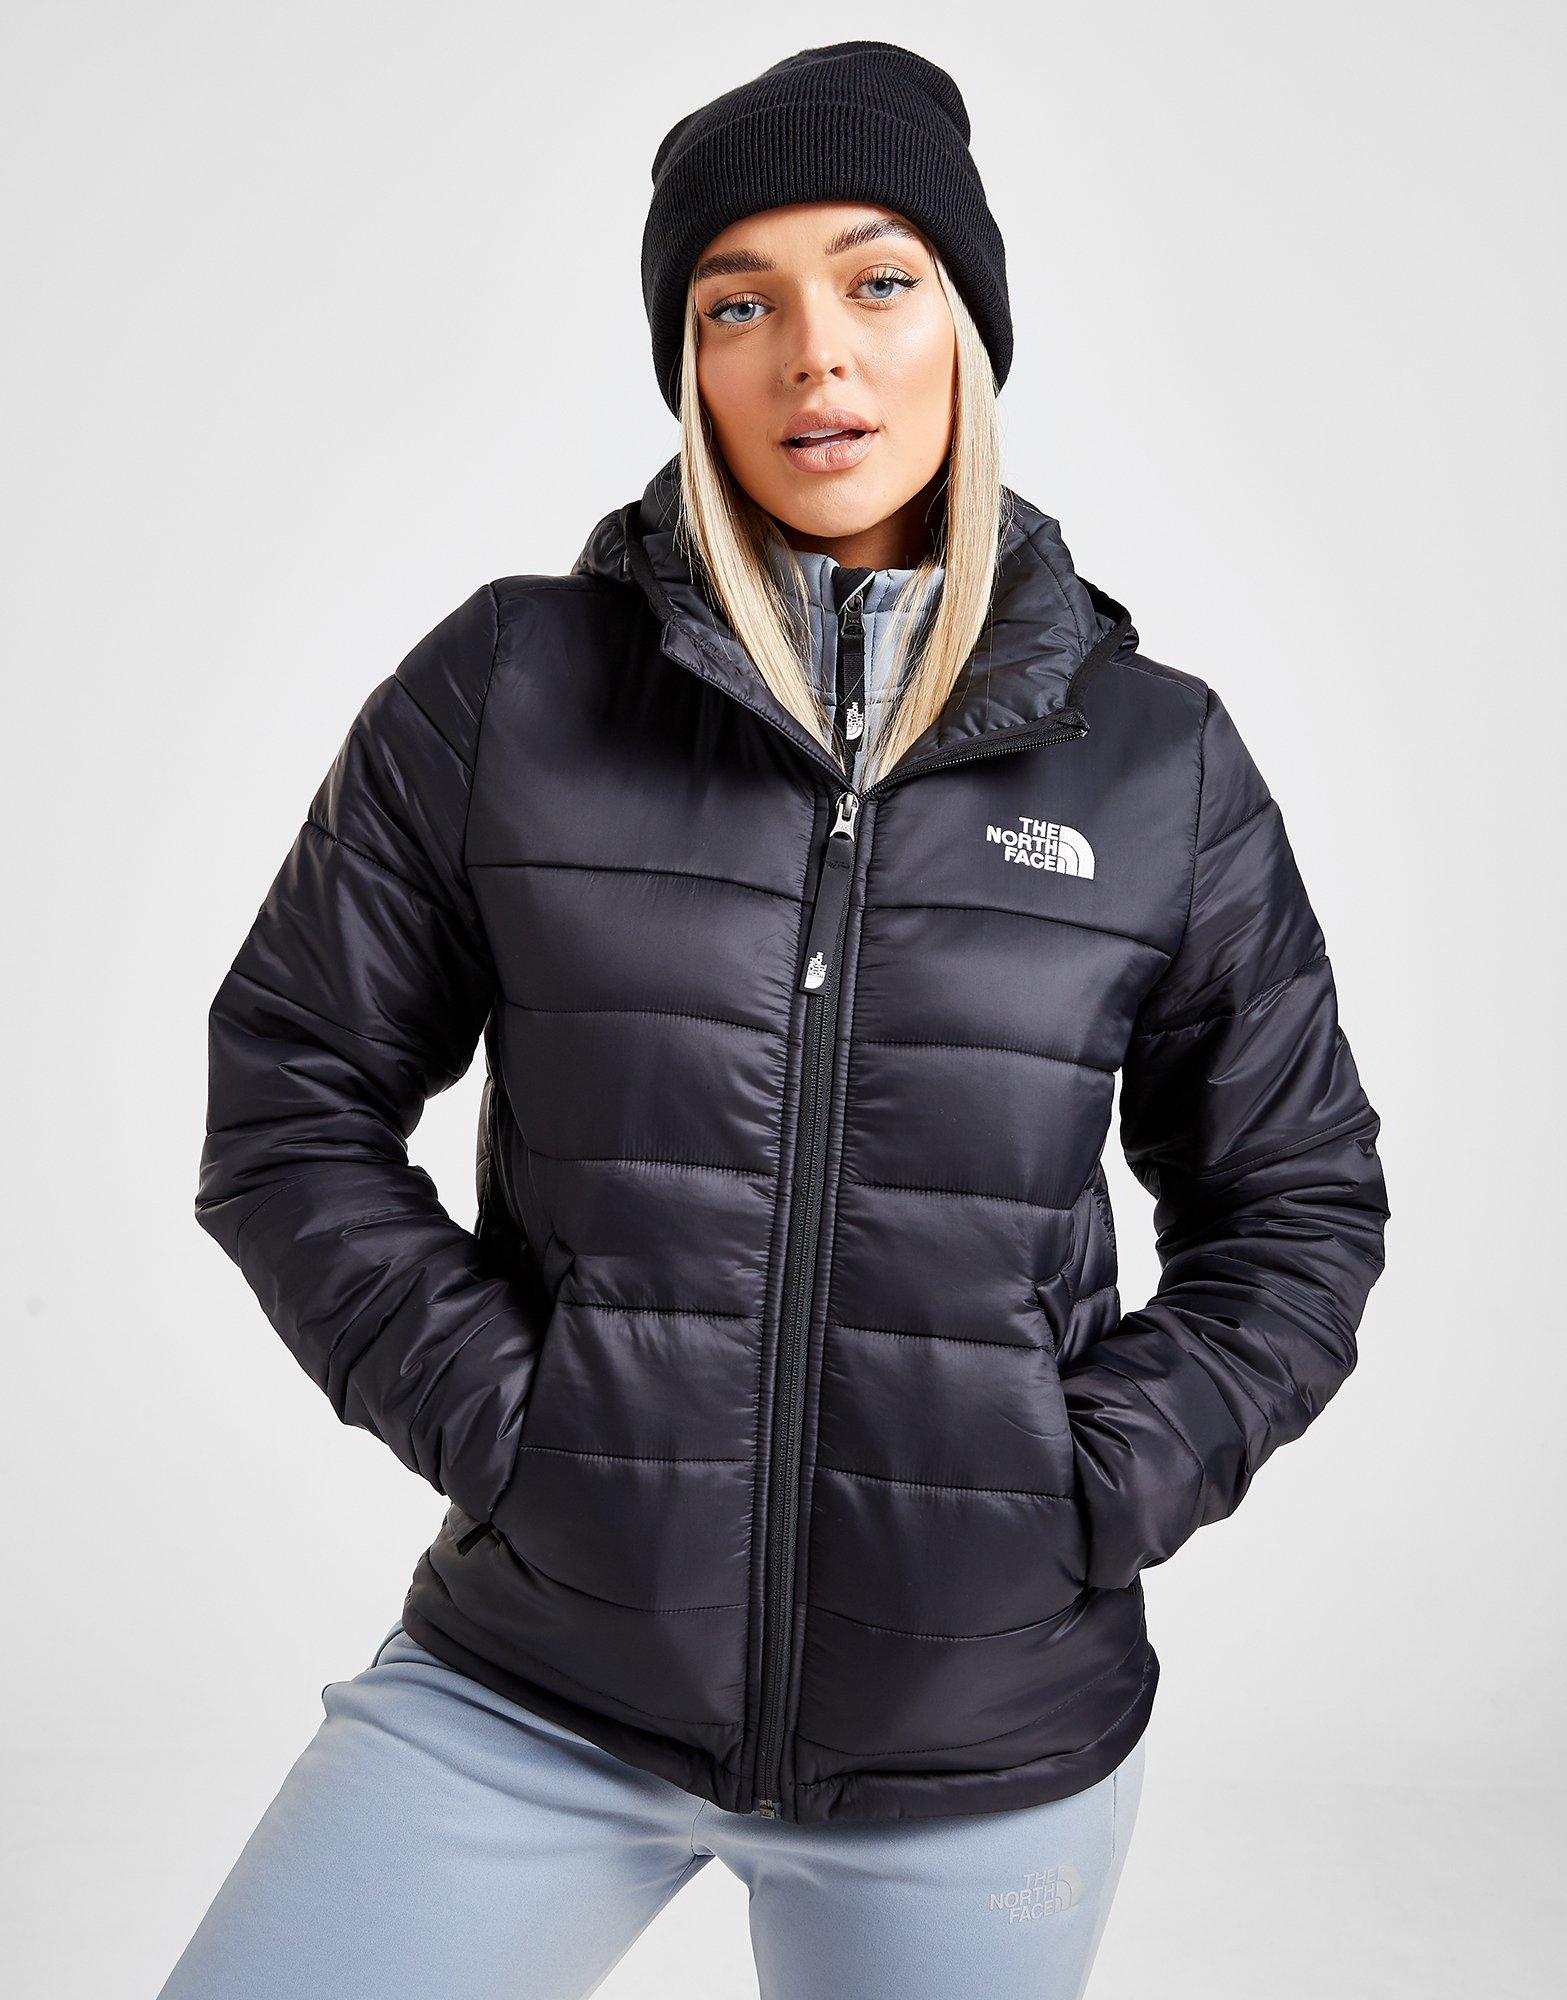 north face padded jacket womens